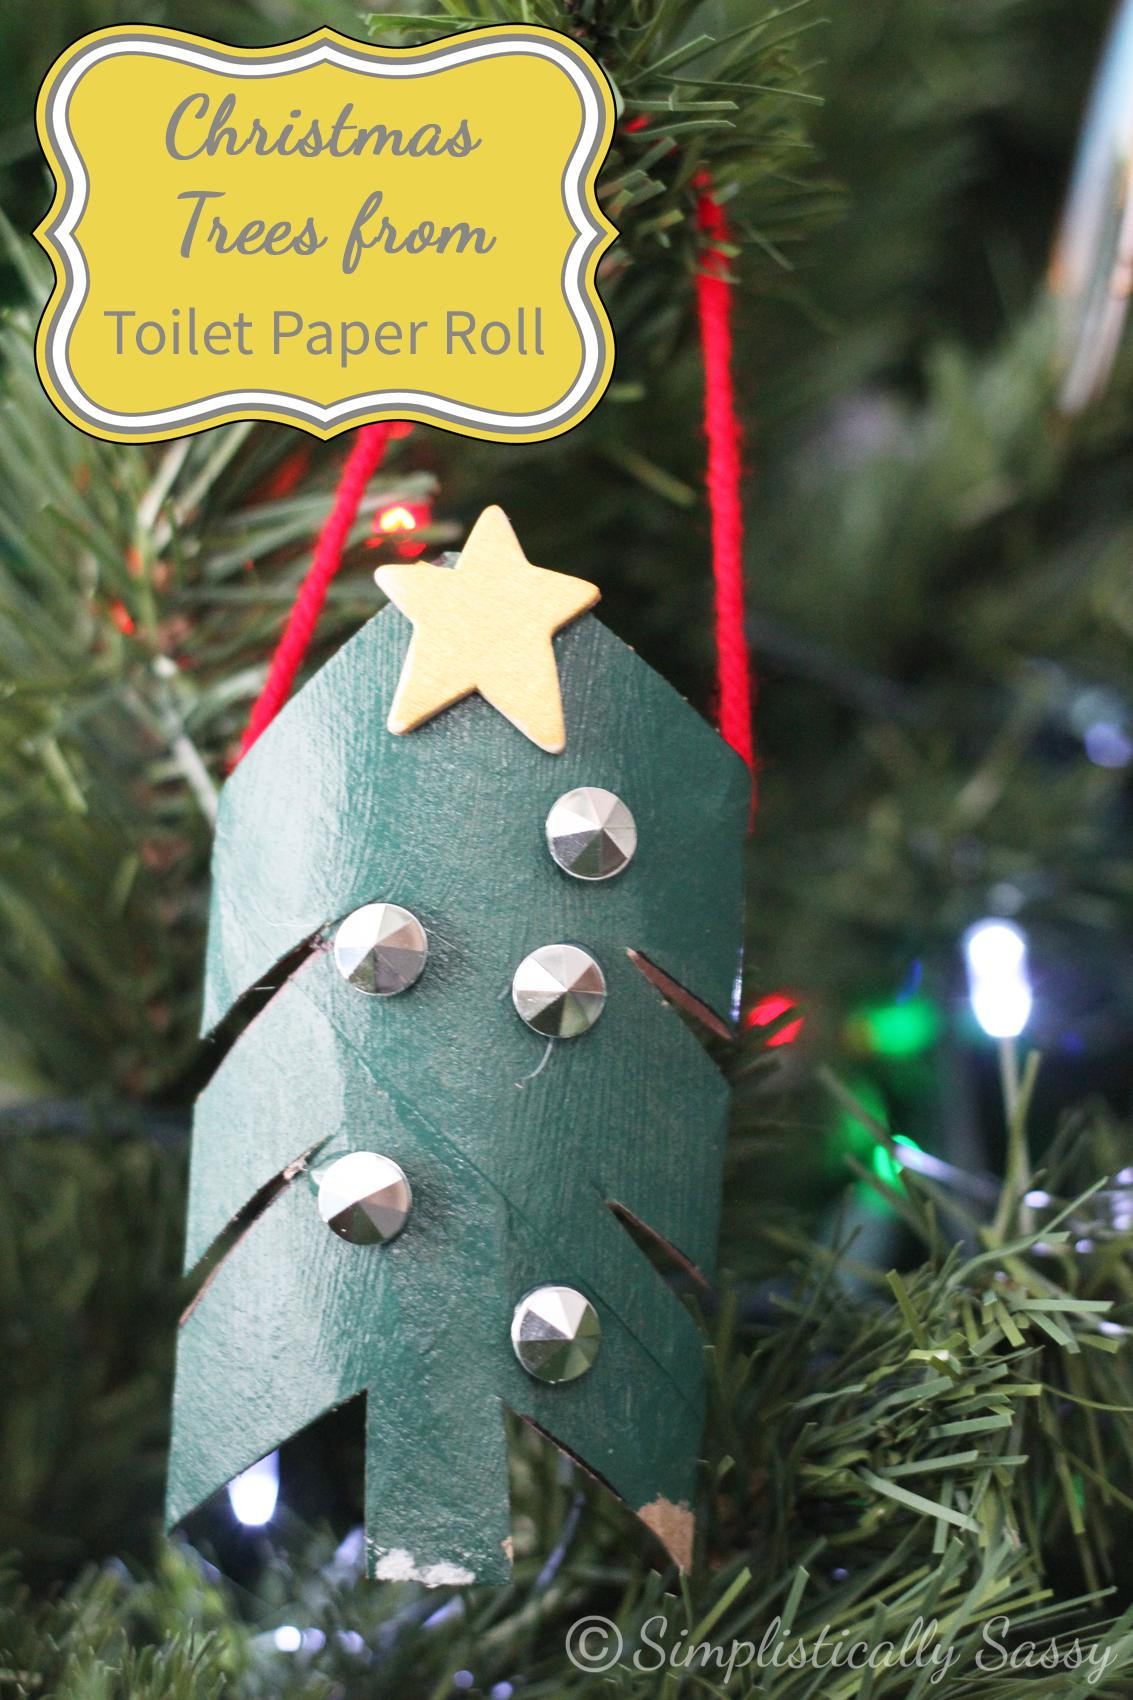 Toilet Paper Roll Craft Christmas
 Toilet Paper Rolls Archives Simplistically Sassy